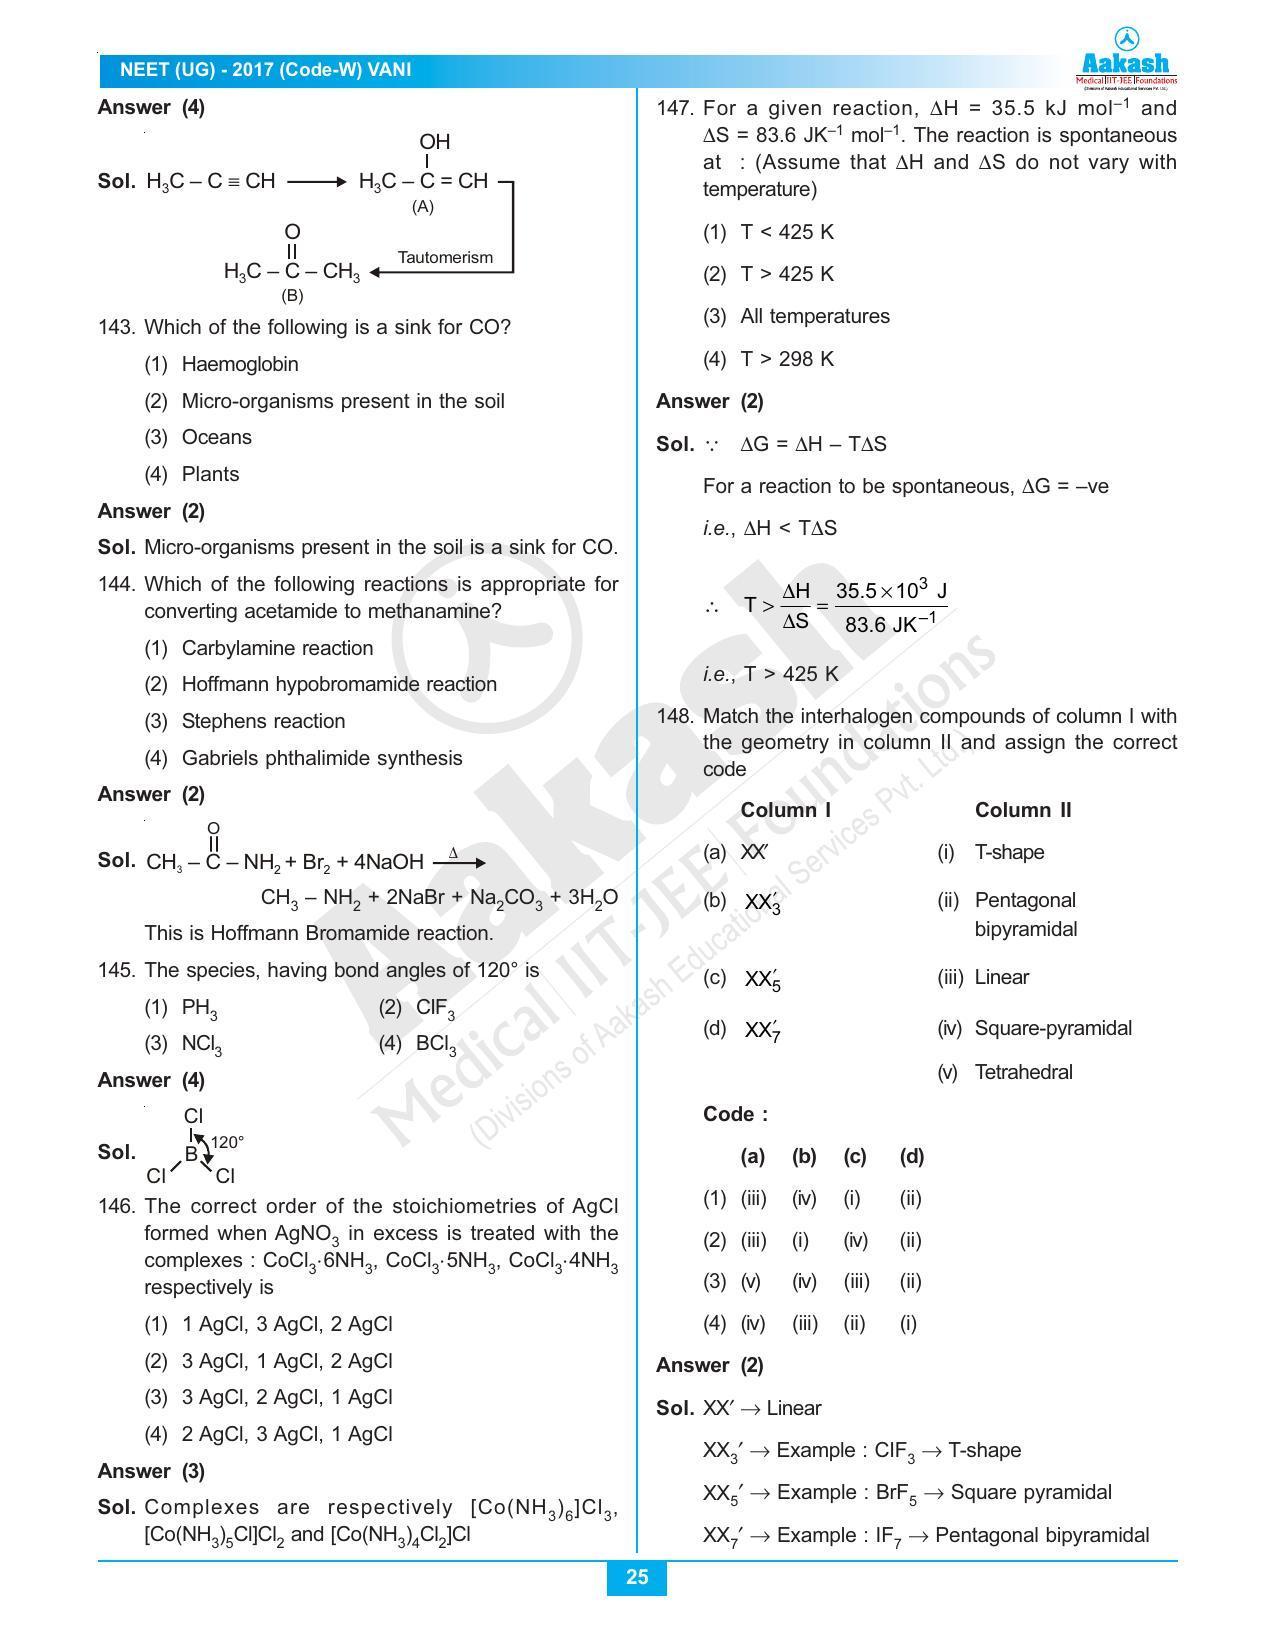  NEET Code W 2017 Answer & Solutions - Page 25